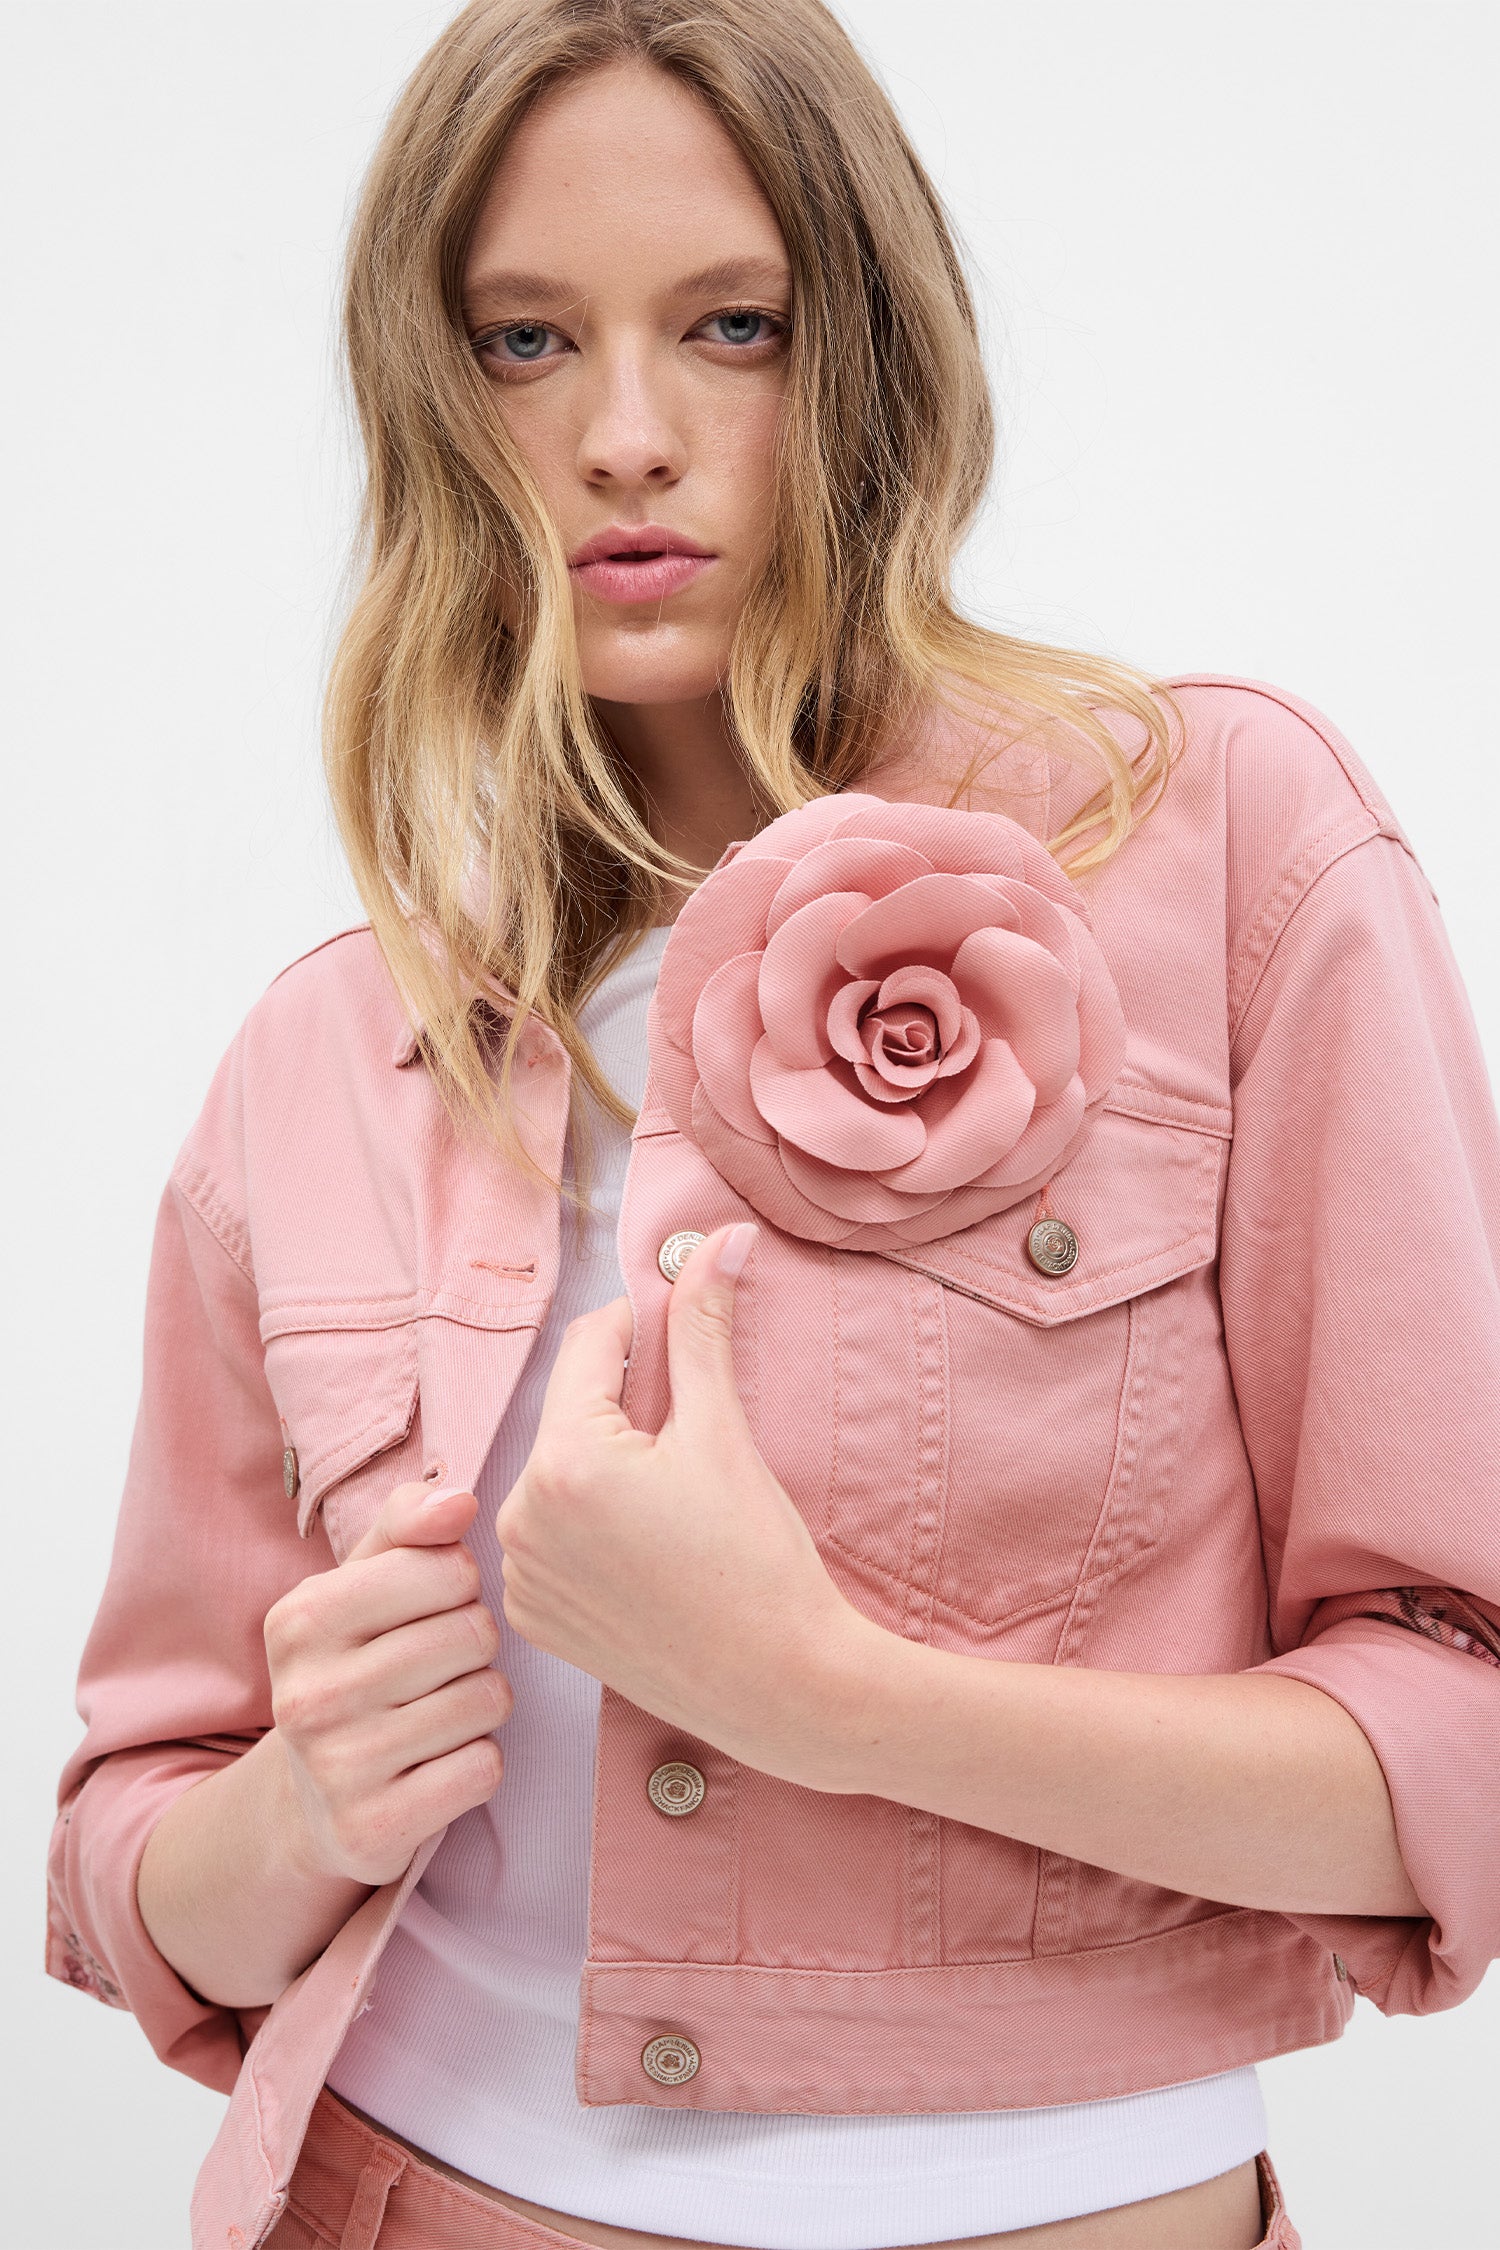 Model wearing pink denim jacket with rosette on chest